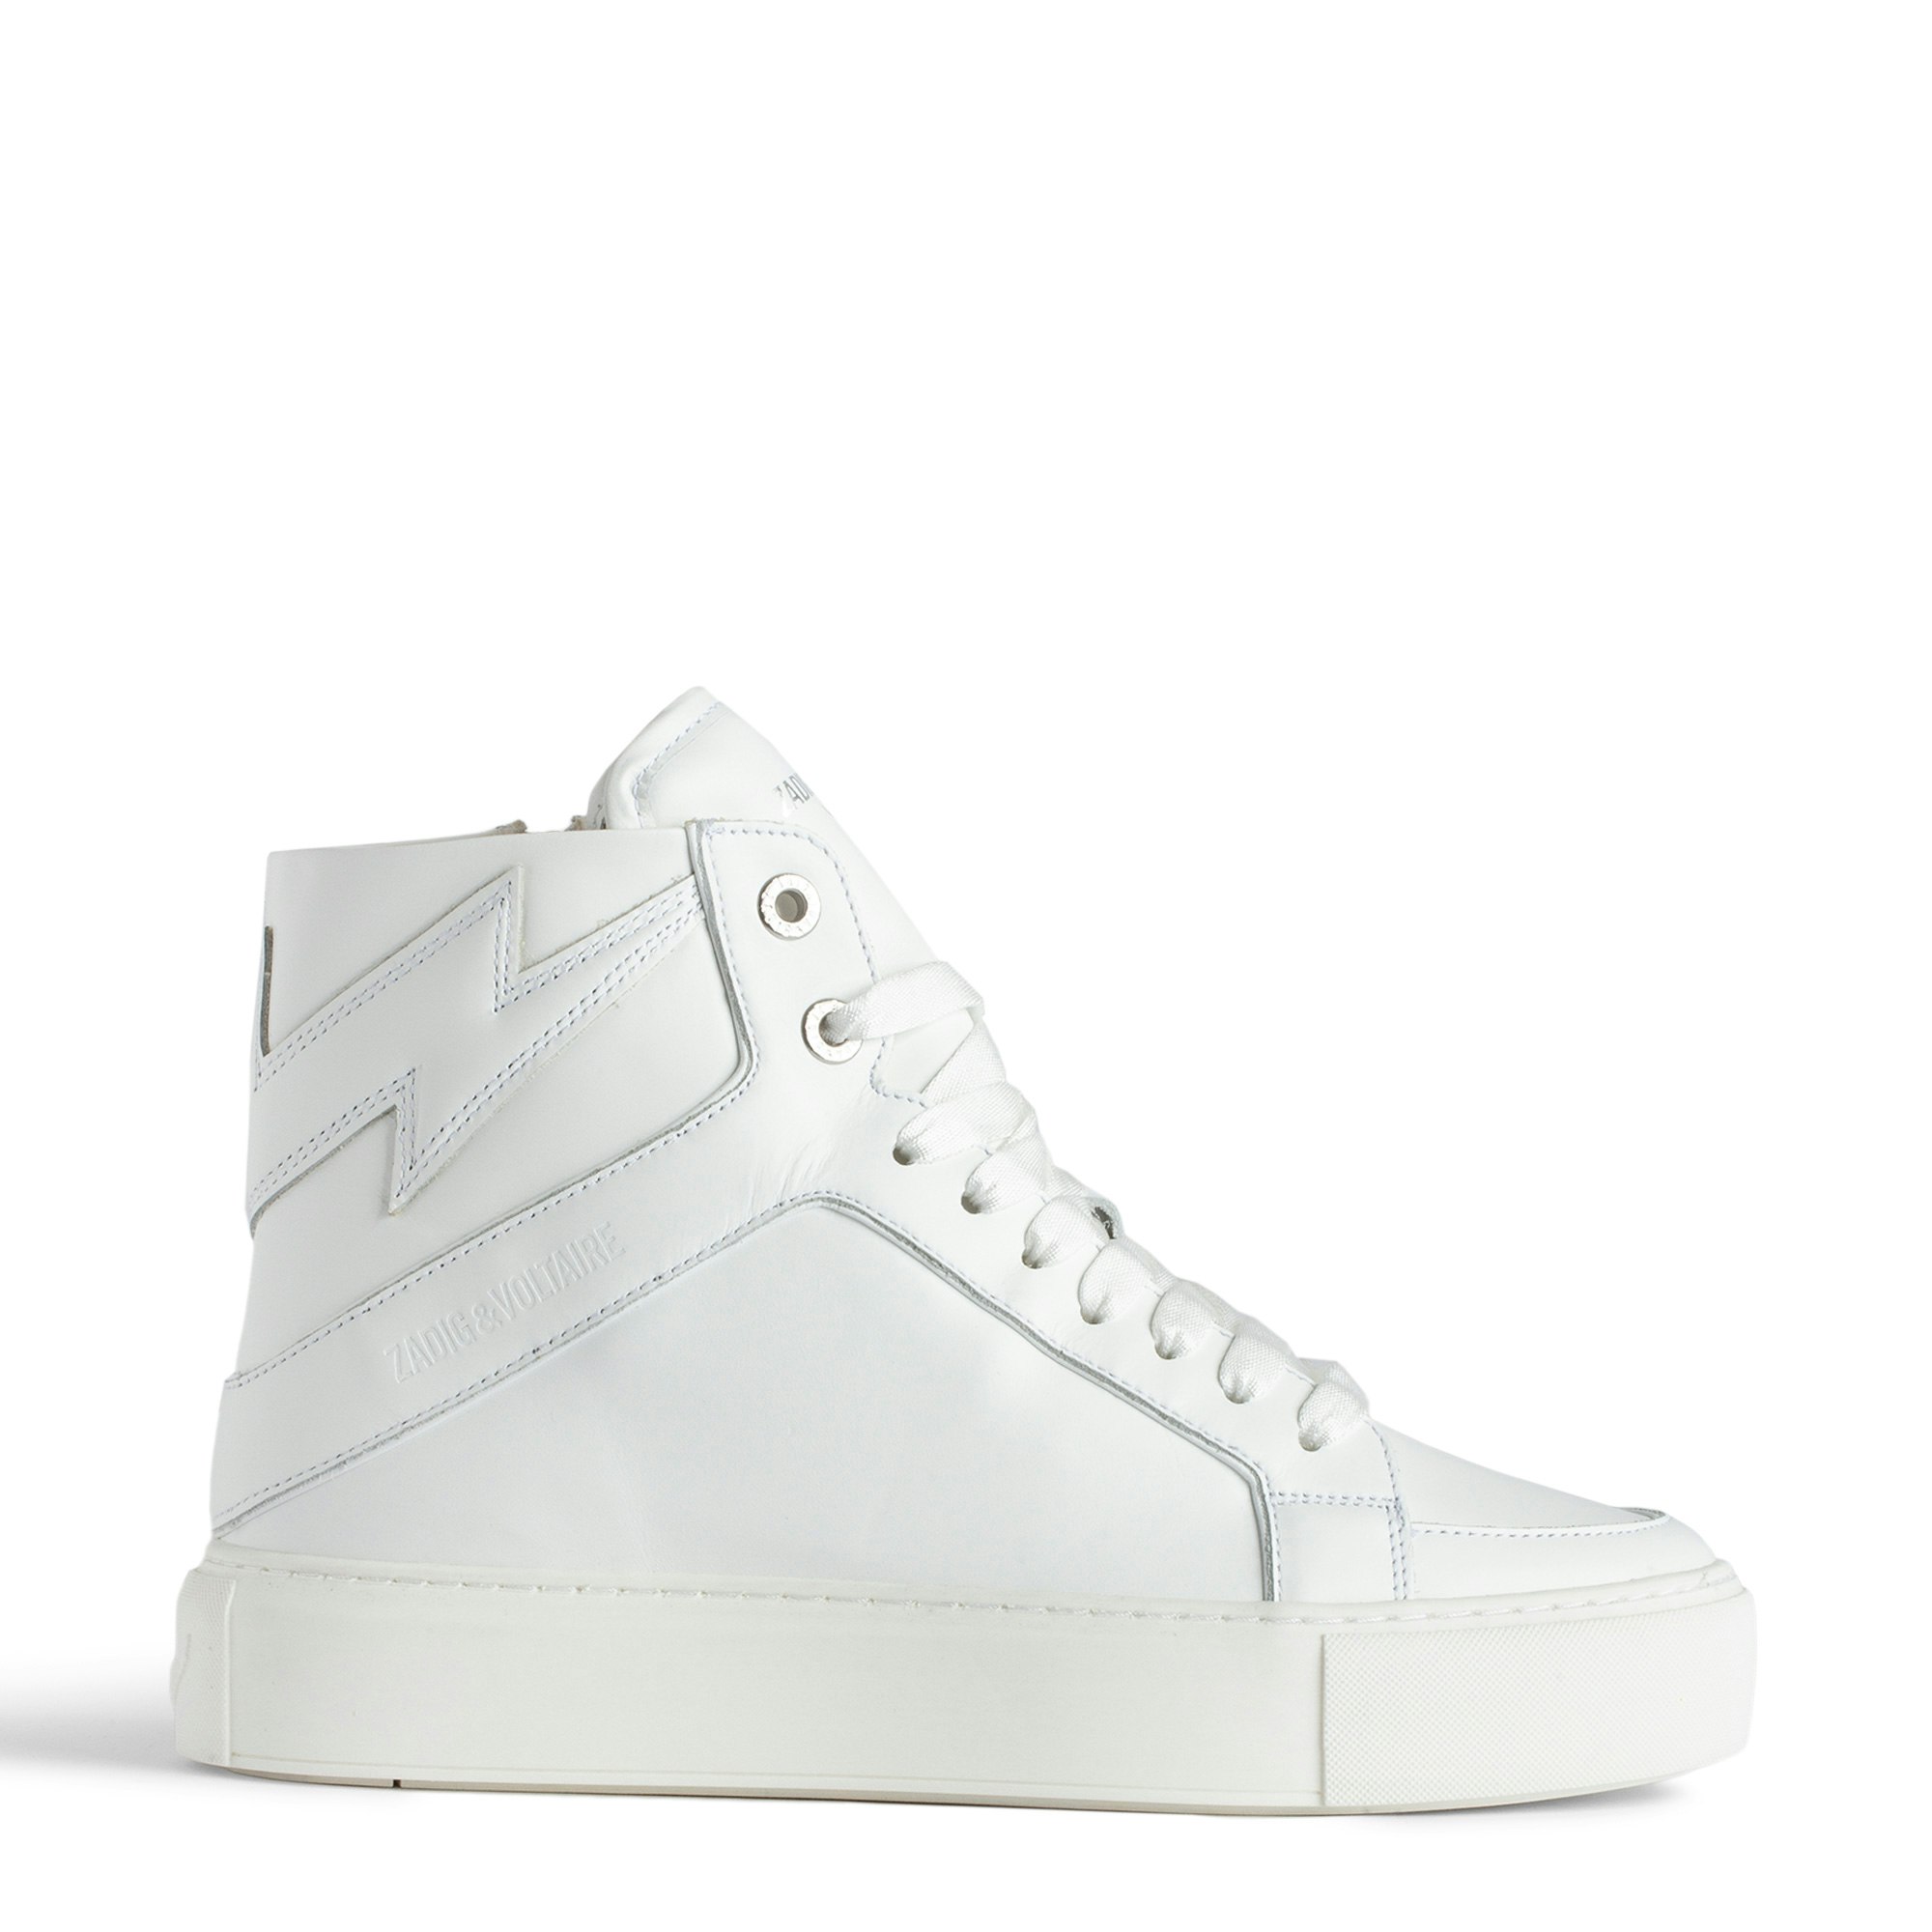 Hohe Sneakers Mit Plateau Zv1747 High Flash - Zadig & Voltaire